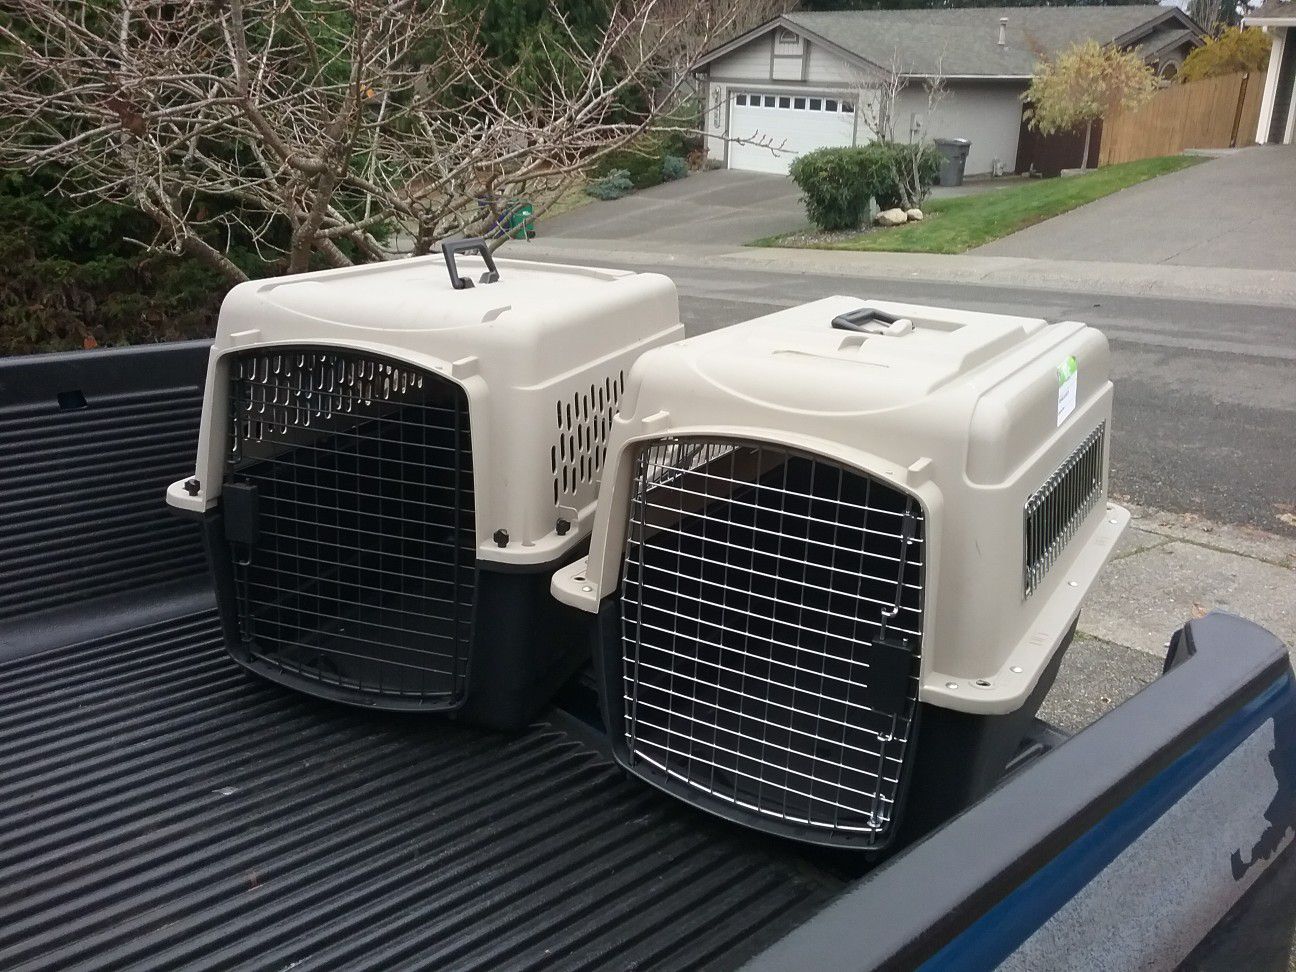 Medium Dog Kennel Crate Carrier Airline Approved like New 28" L by 20" W by 20" H $35 Each